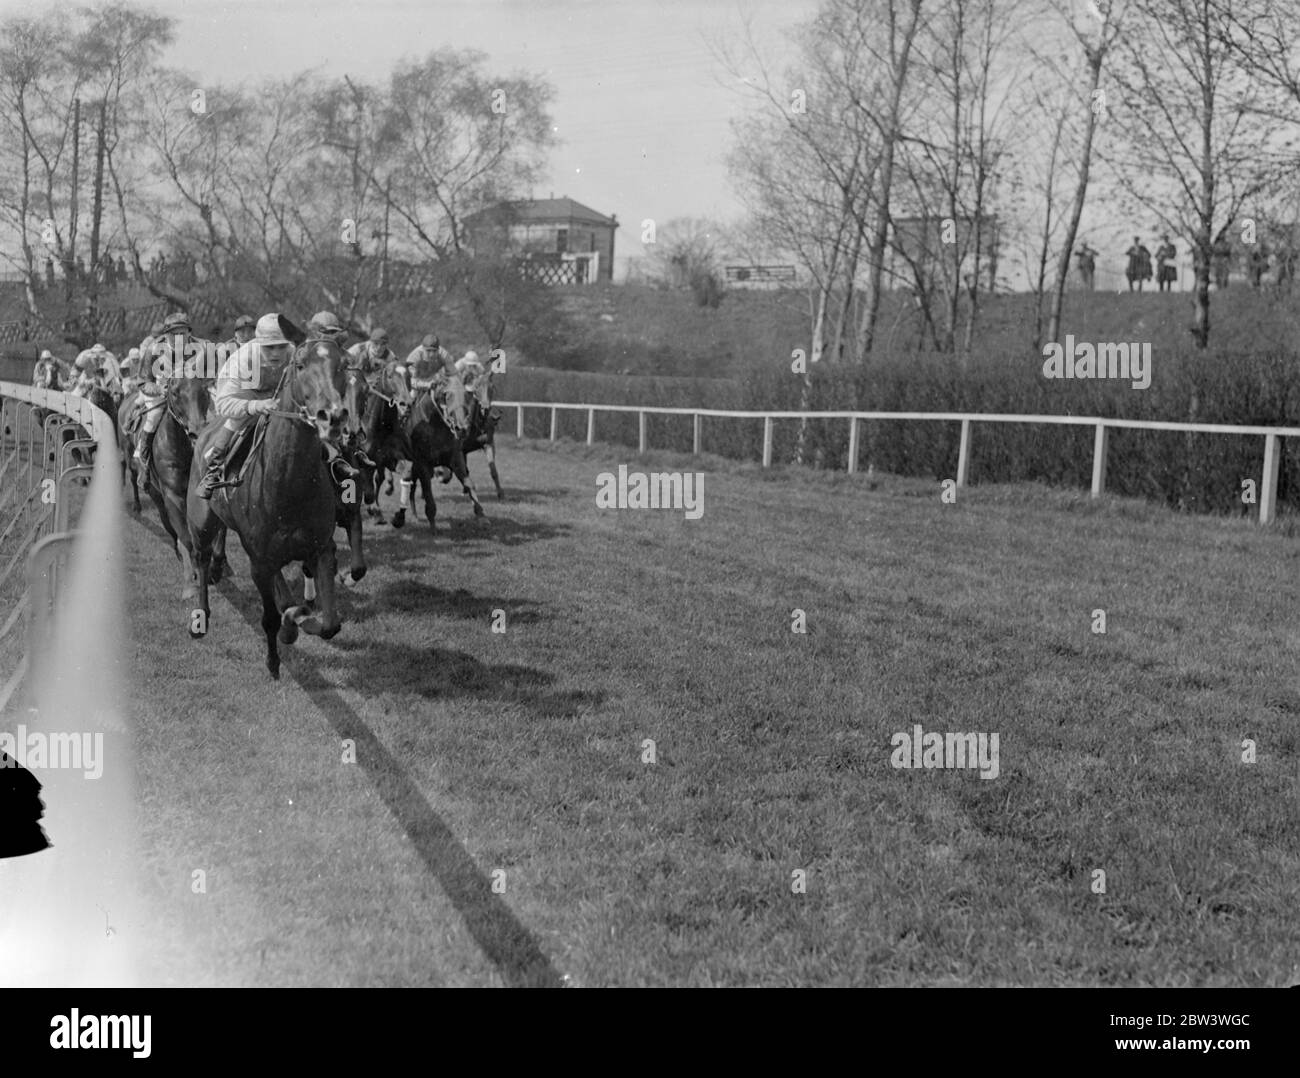 July Folly wins at Sandown . July Folly , ridden by W Wing , won the long distance selling handicap race at Sandown Park . Zeni was second and Tuppence third . Photo shows , July Folly leading as the field bunched together at the railway turn . 25 April 1936 Stock Photo